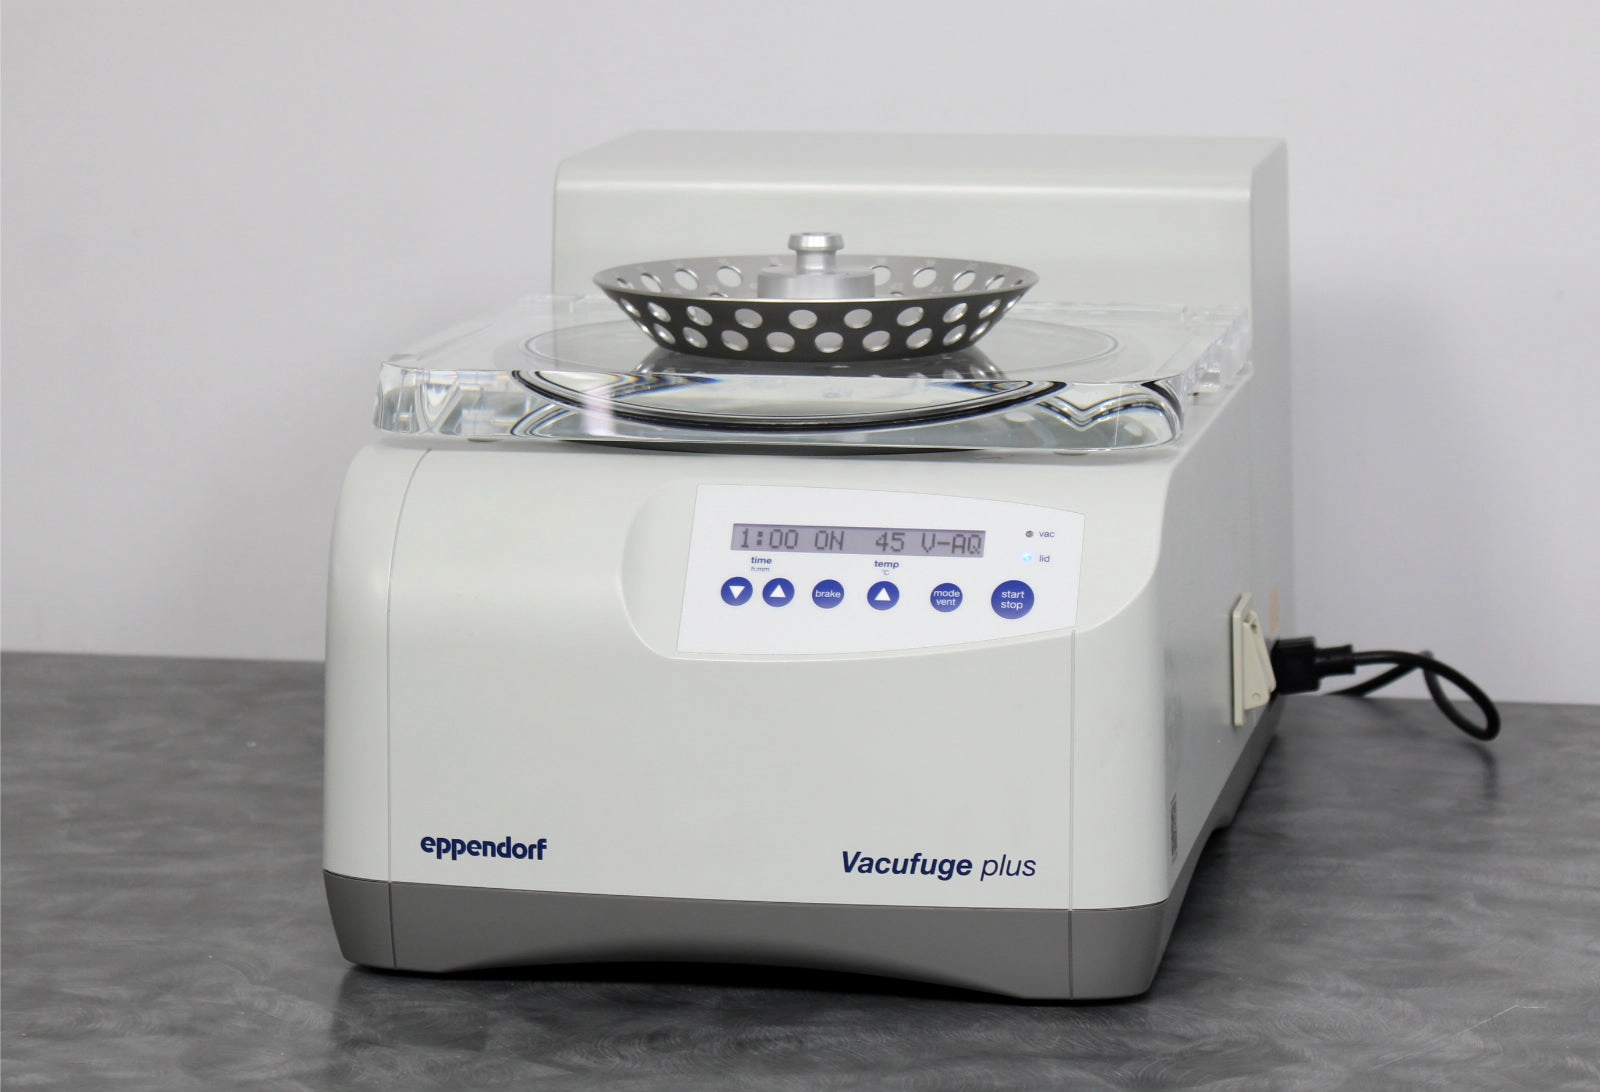 Eppendorf Vacufuge plus 5305 Centrifugal Concentrator Evaporator with F45-48-11